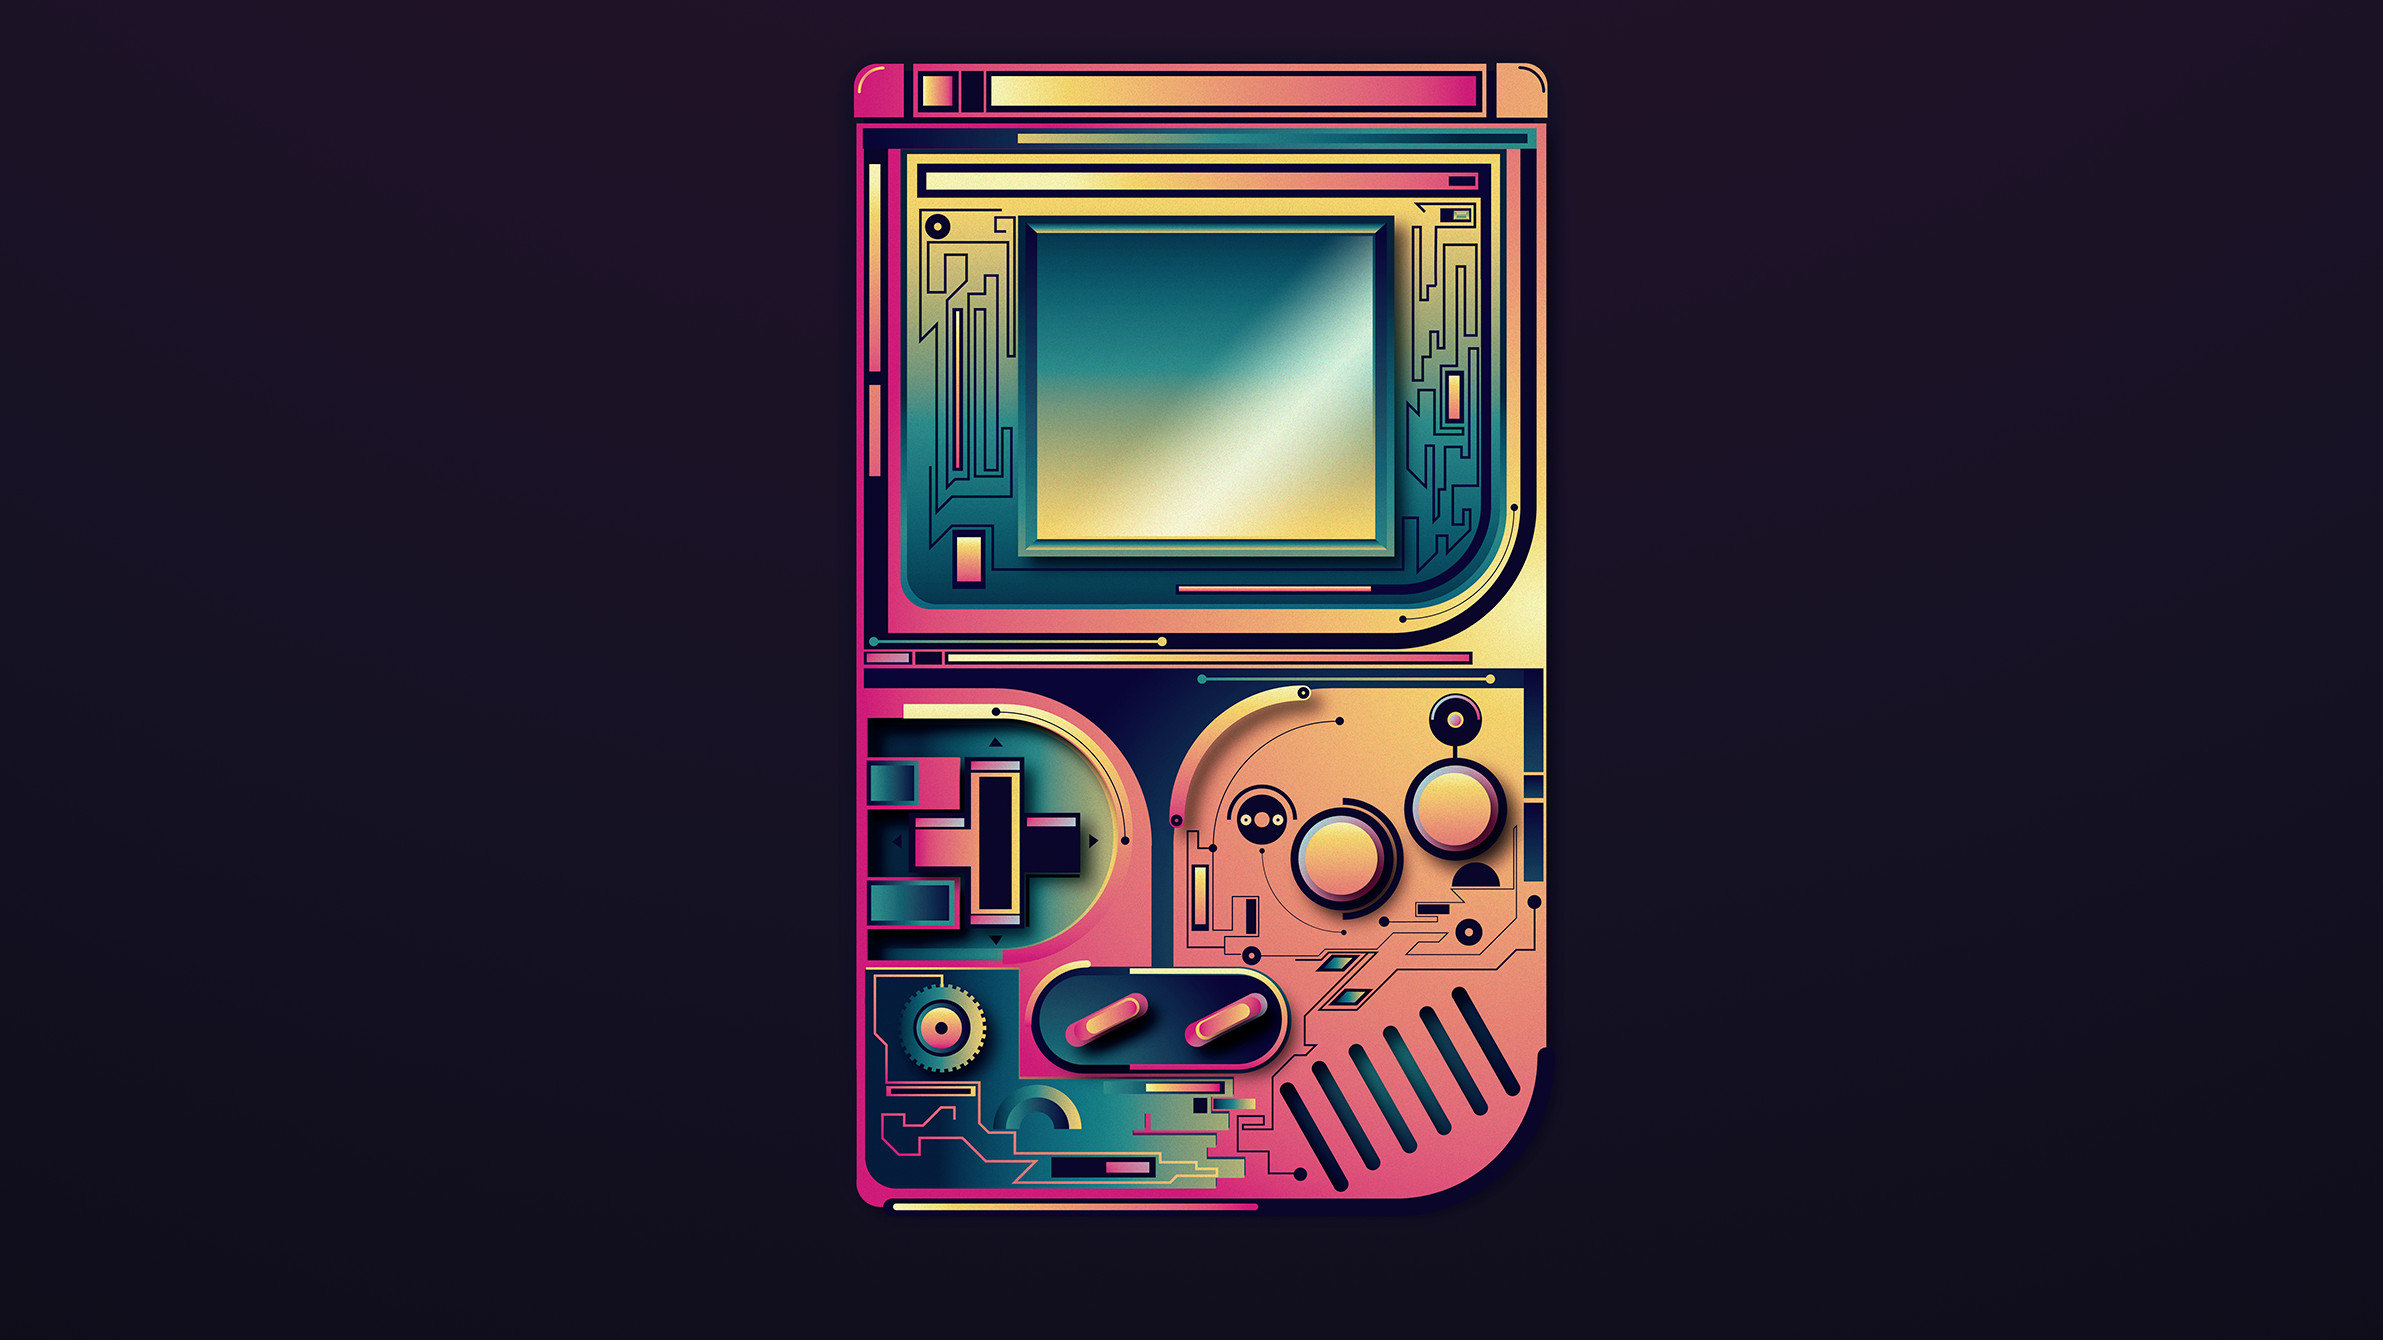 2383x1340 Album: Retro Gameboy Tags: /r/wallpapers Reddit Brochure Flyer Paper Poster  Collage Text Electronics Screen Phone Entertainment Center.